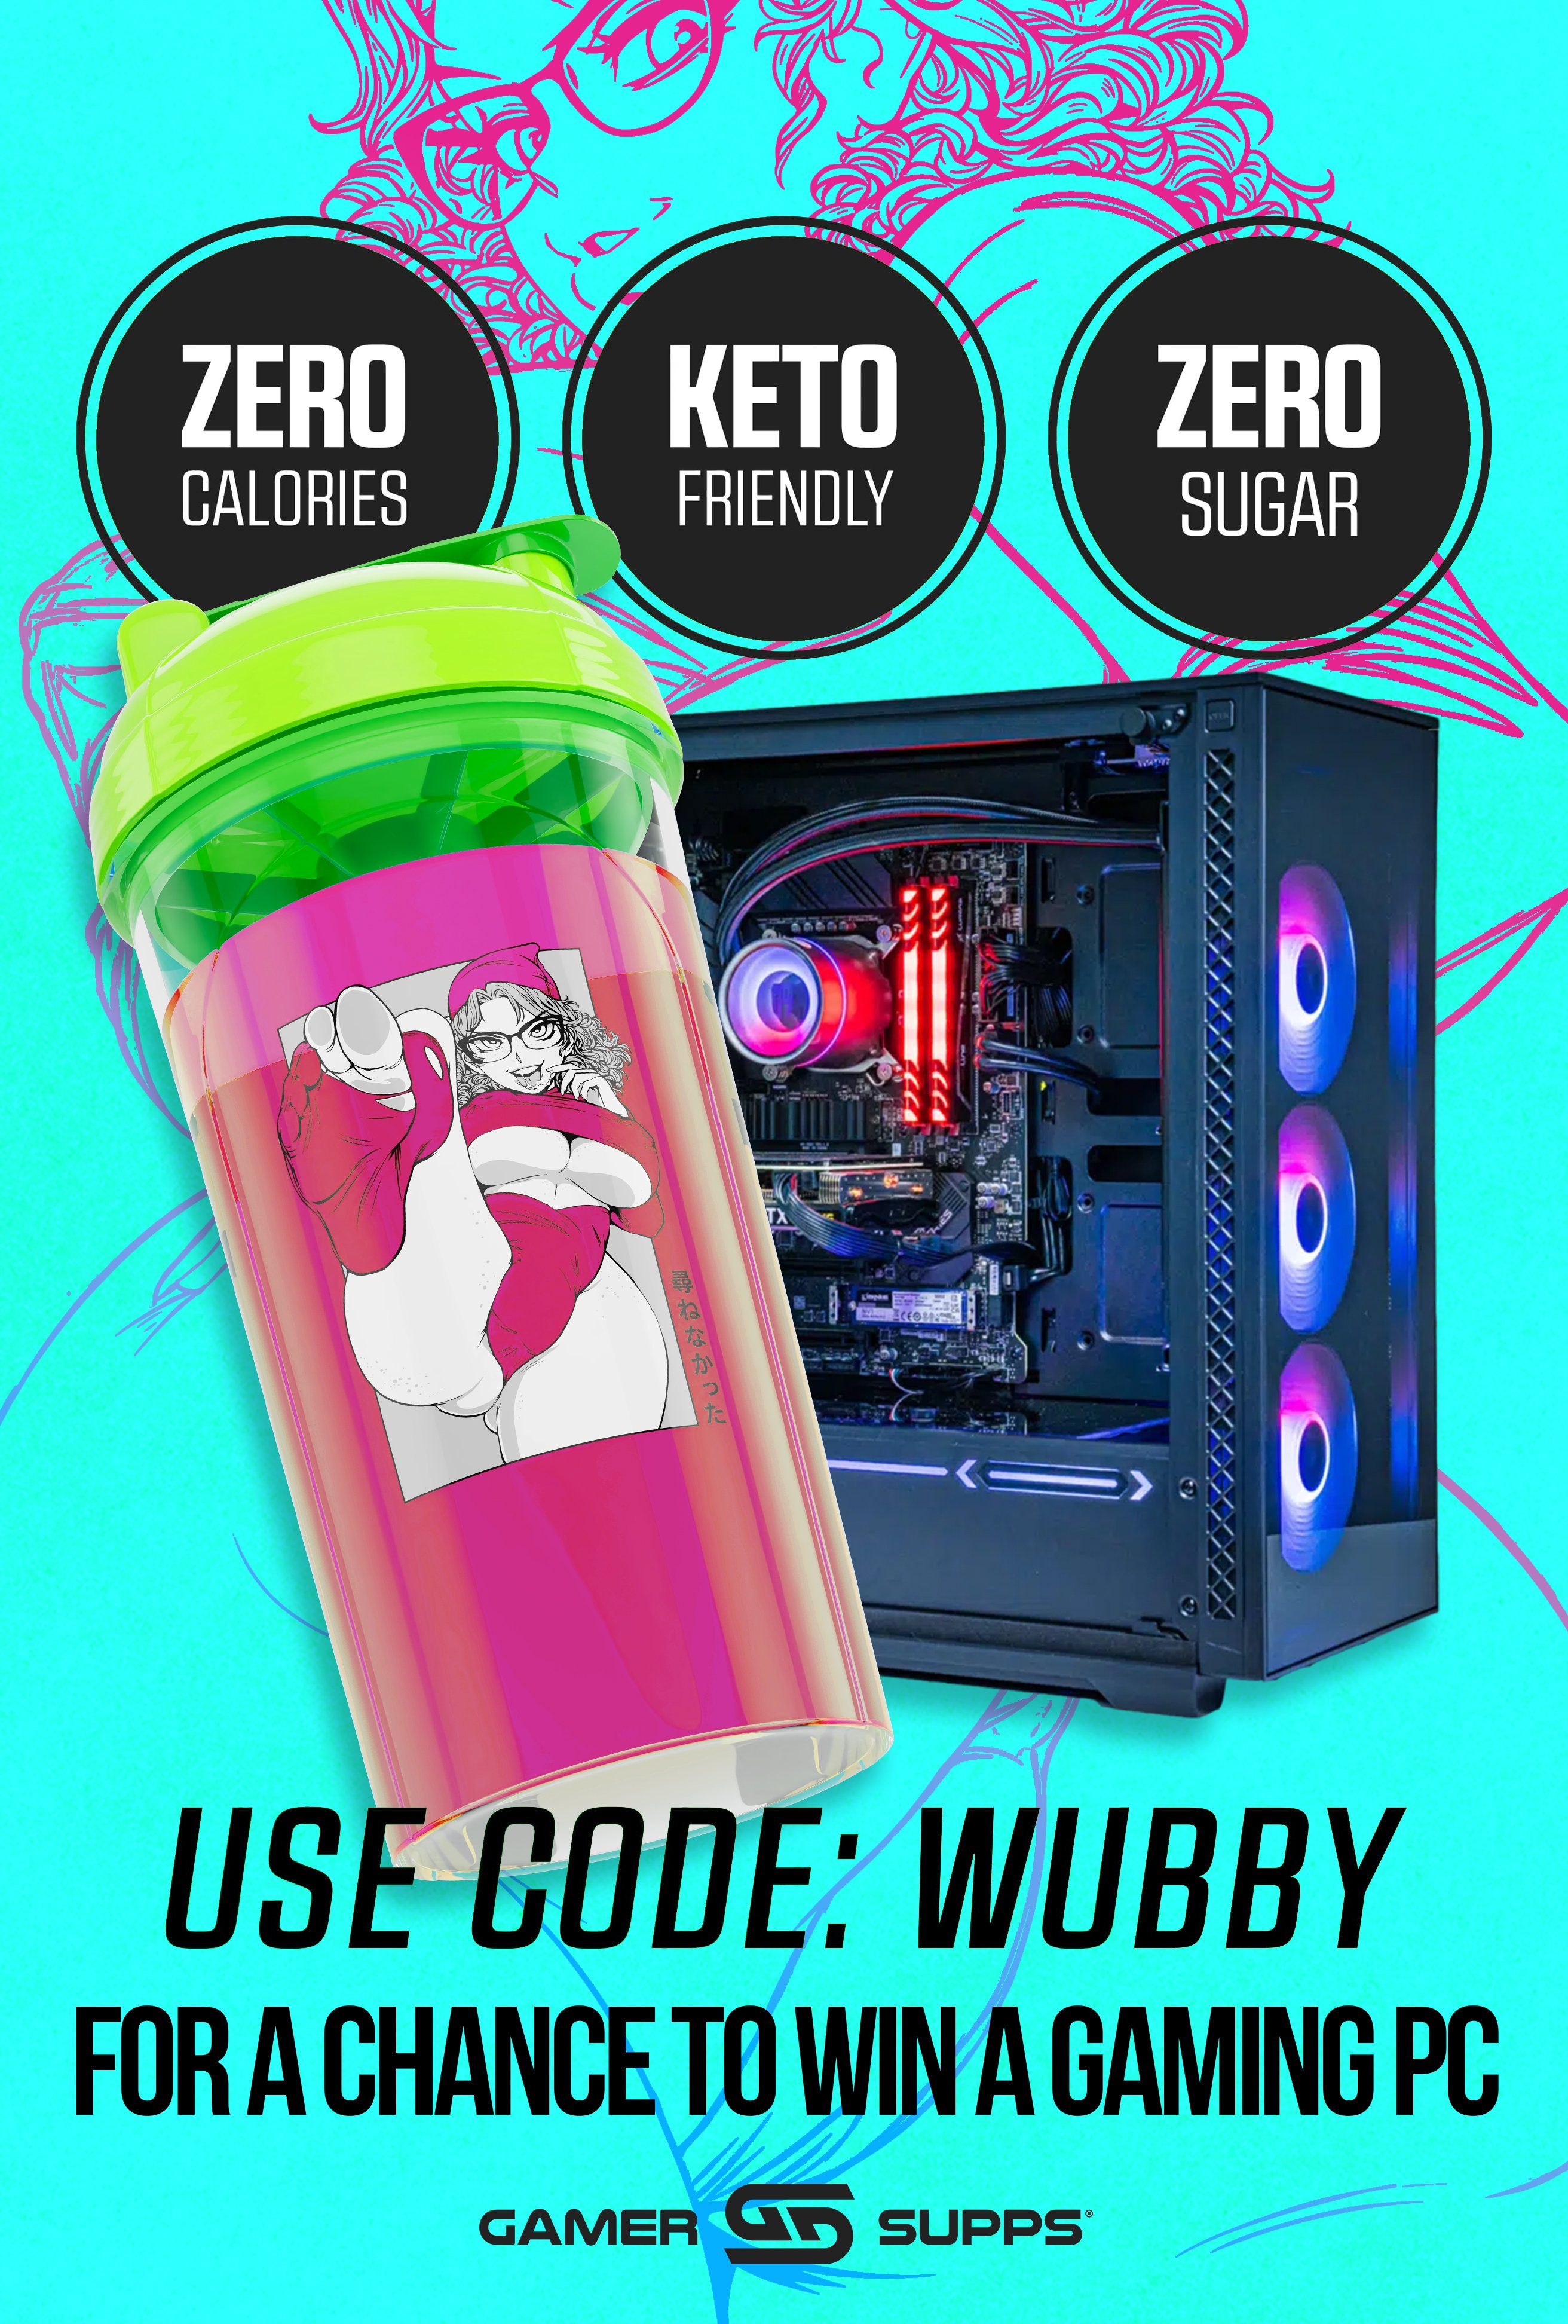 Gamer Supps - Get your Amouranth X Waifu Cups now!